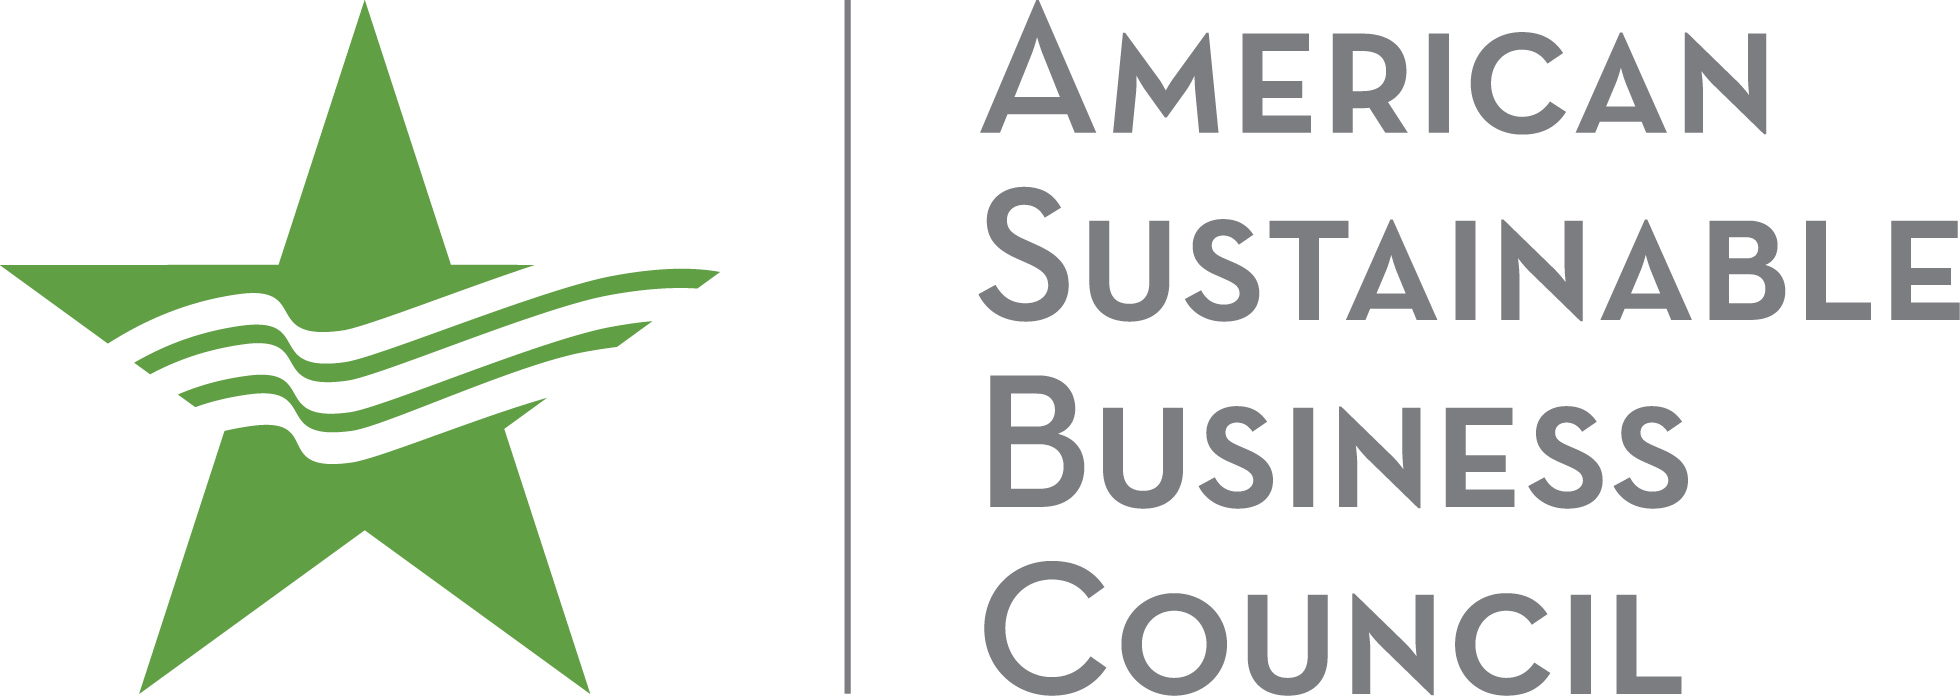 American Sustainable Business Council logo